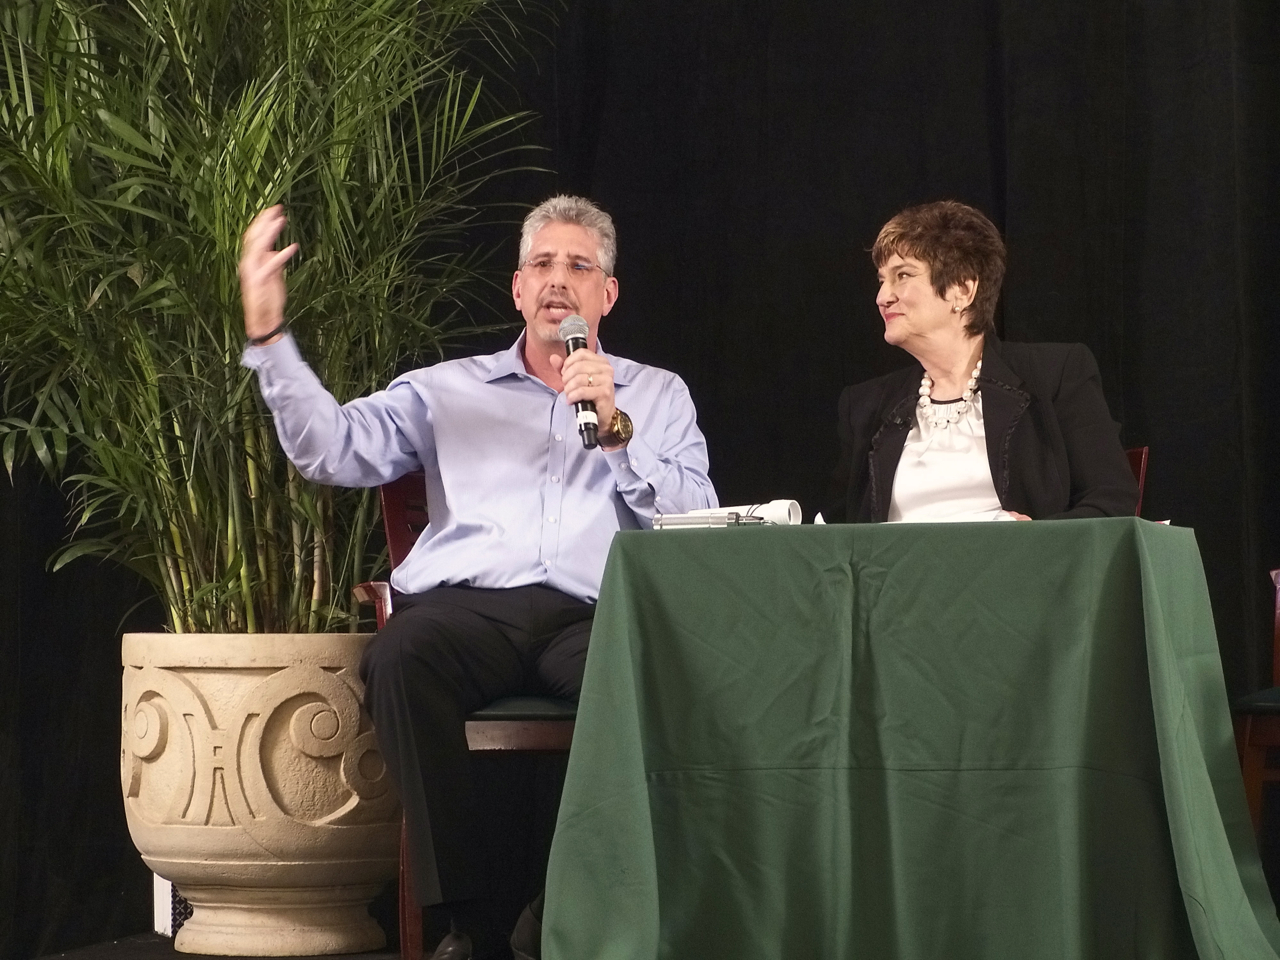 Dr. Lampert speaks at the CURE Symposium in South Florida.